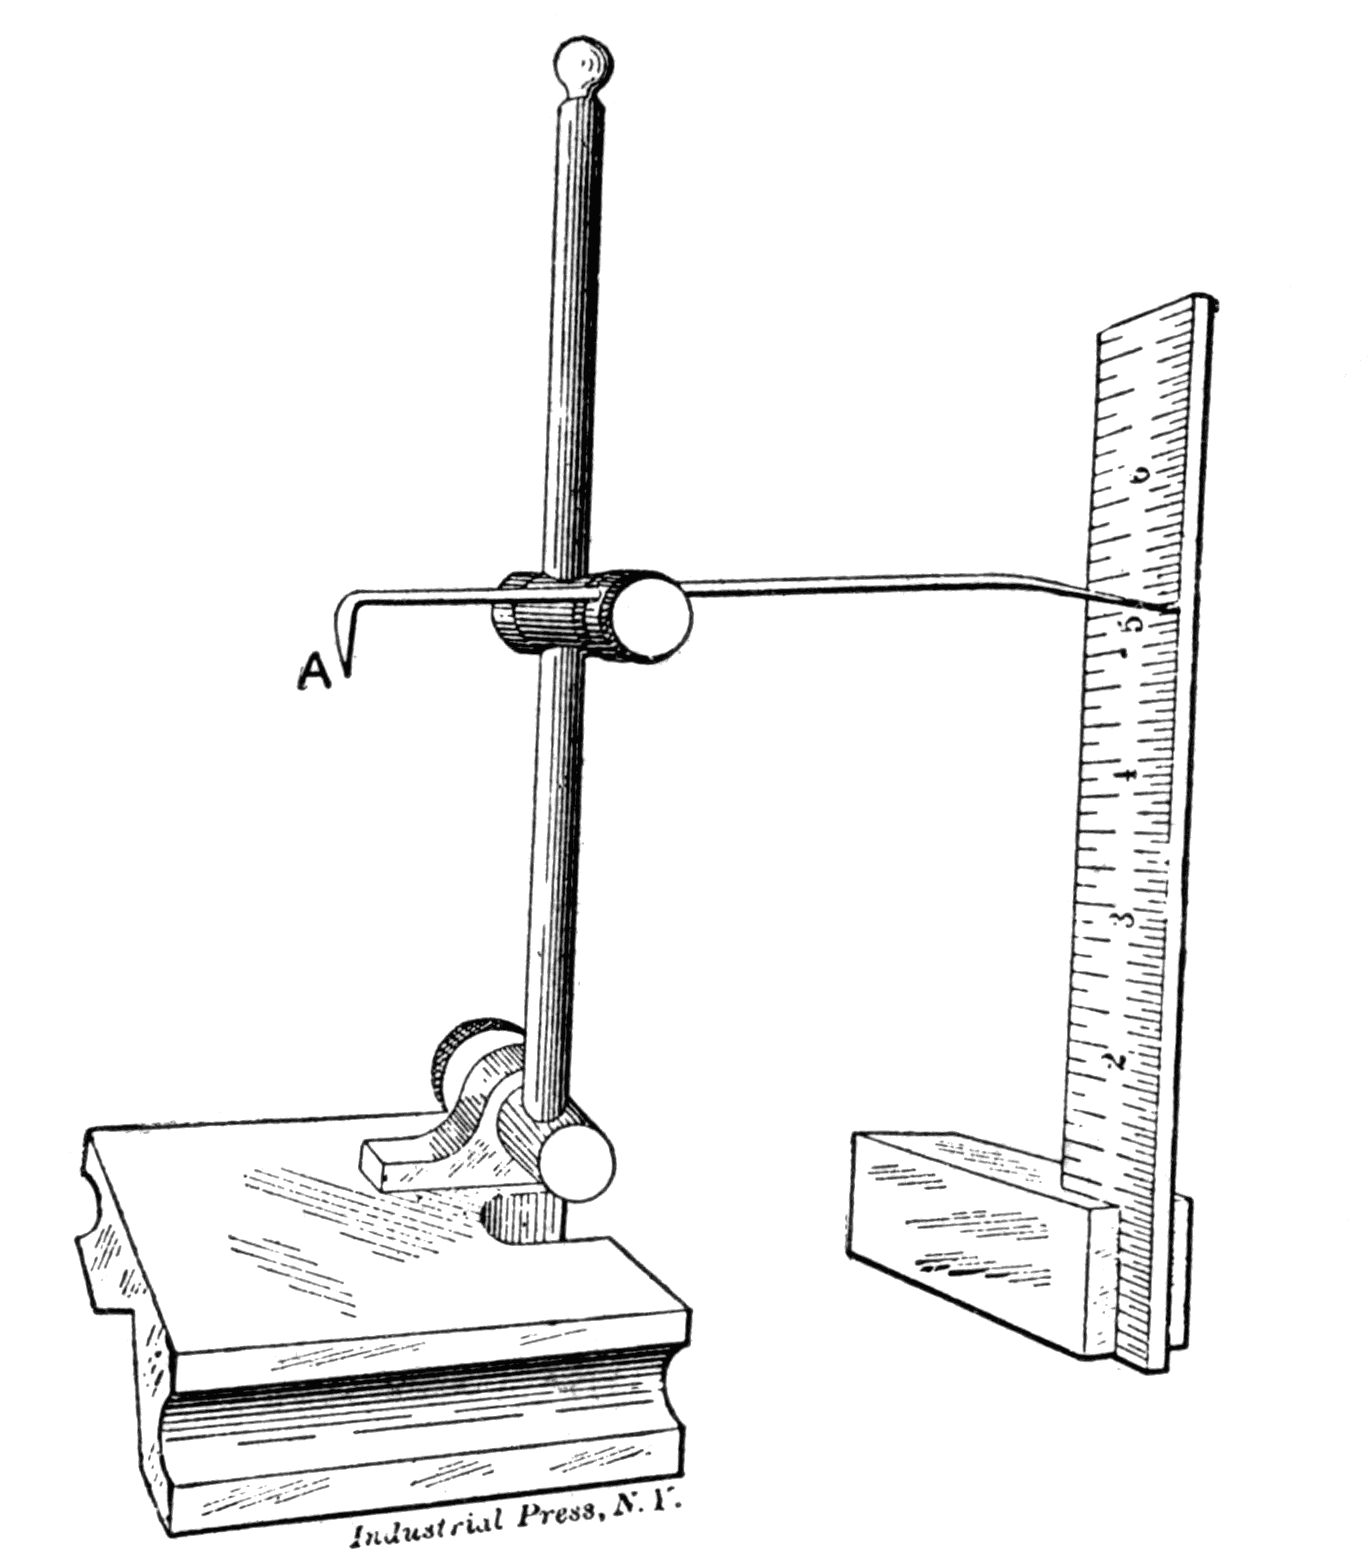 Fig. 11. Method of Adjusting the Needle of a Surface Gage